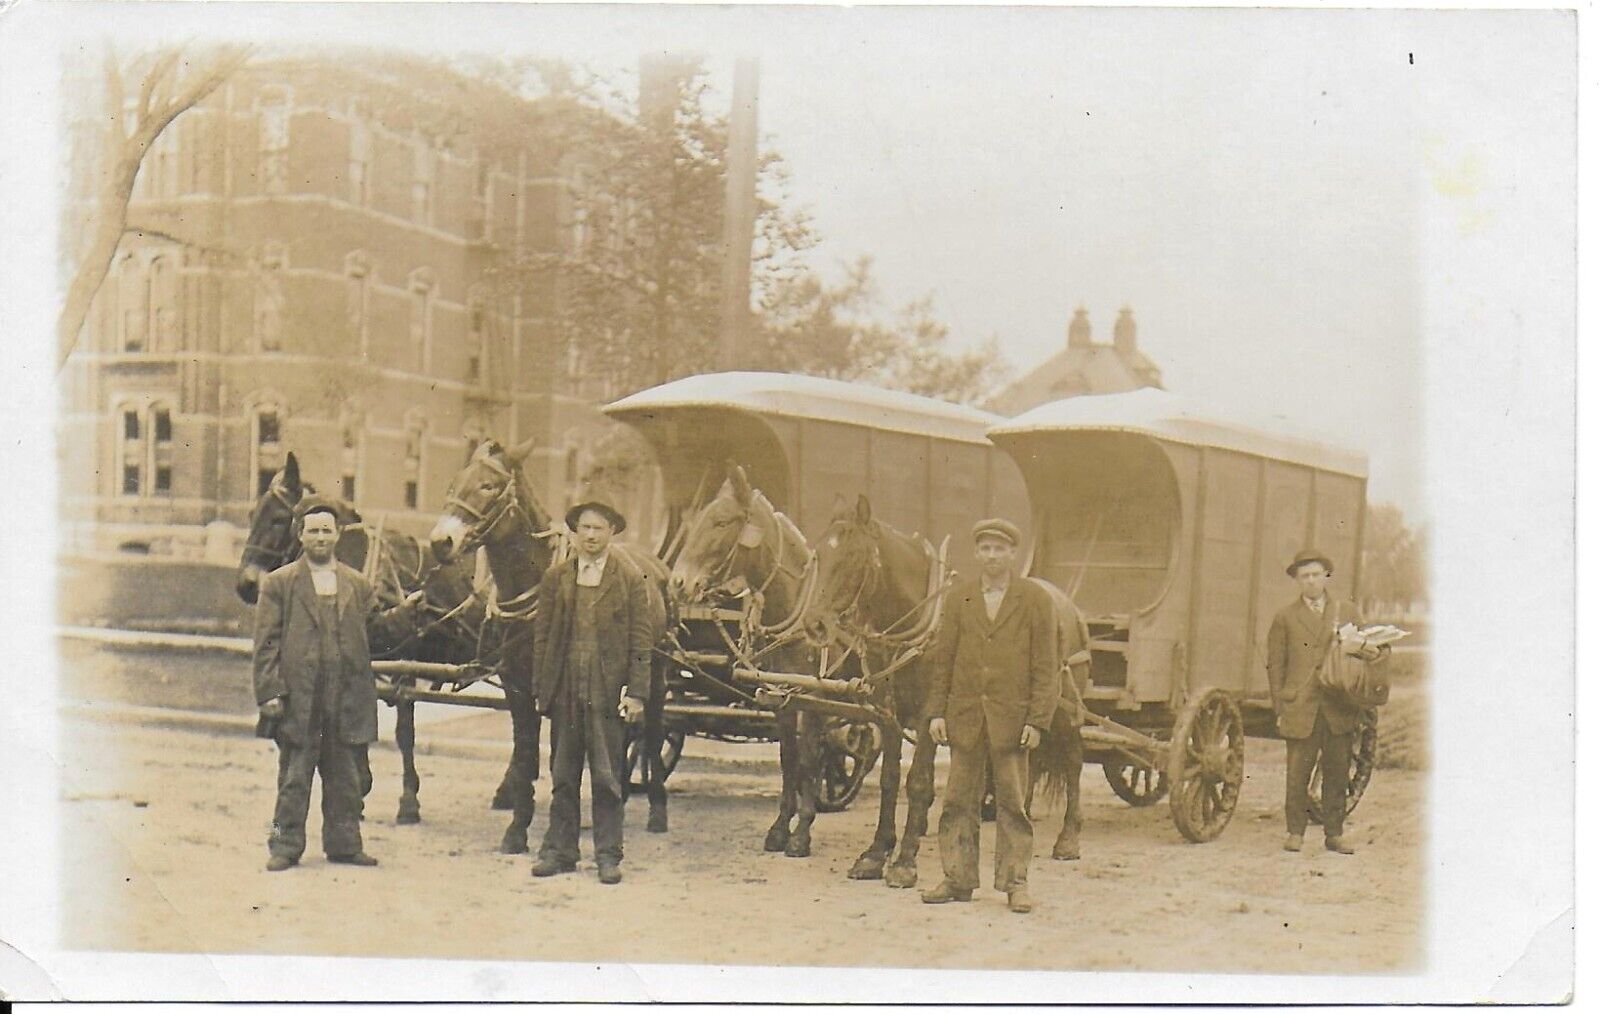 RPPC of 2 Horse Drawn Ice Delivery Wagons & a Postman in Towanda Kansas c1905-10